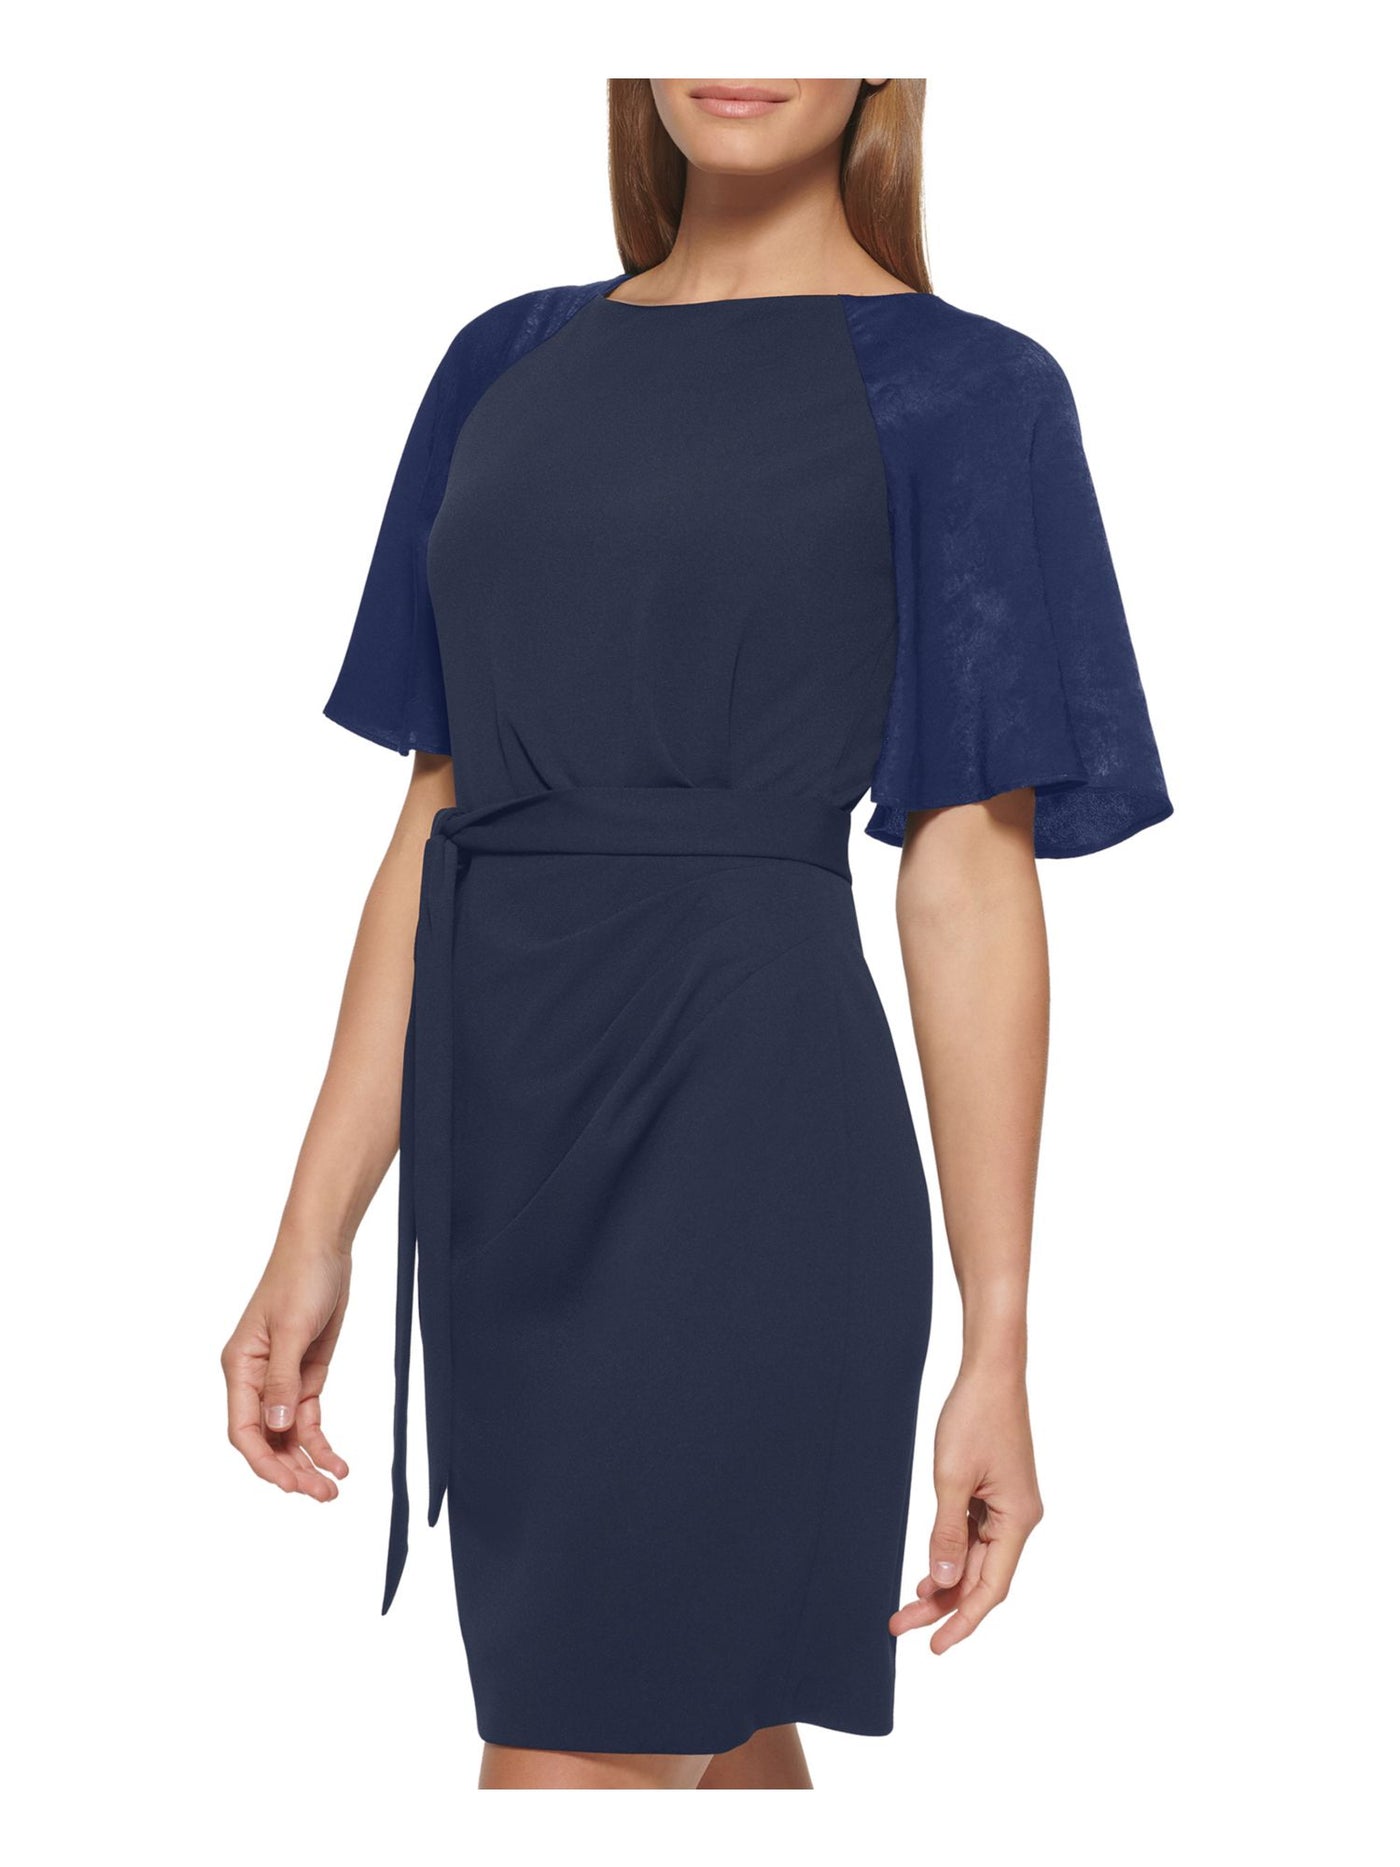 DKNY Womens Navy Zippered Belted Flutter Sleeve Crew Neck Above The Knee Wear To Work Sheath Dress 16